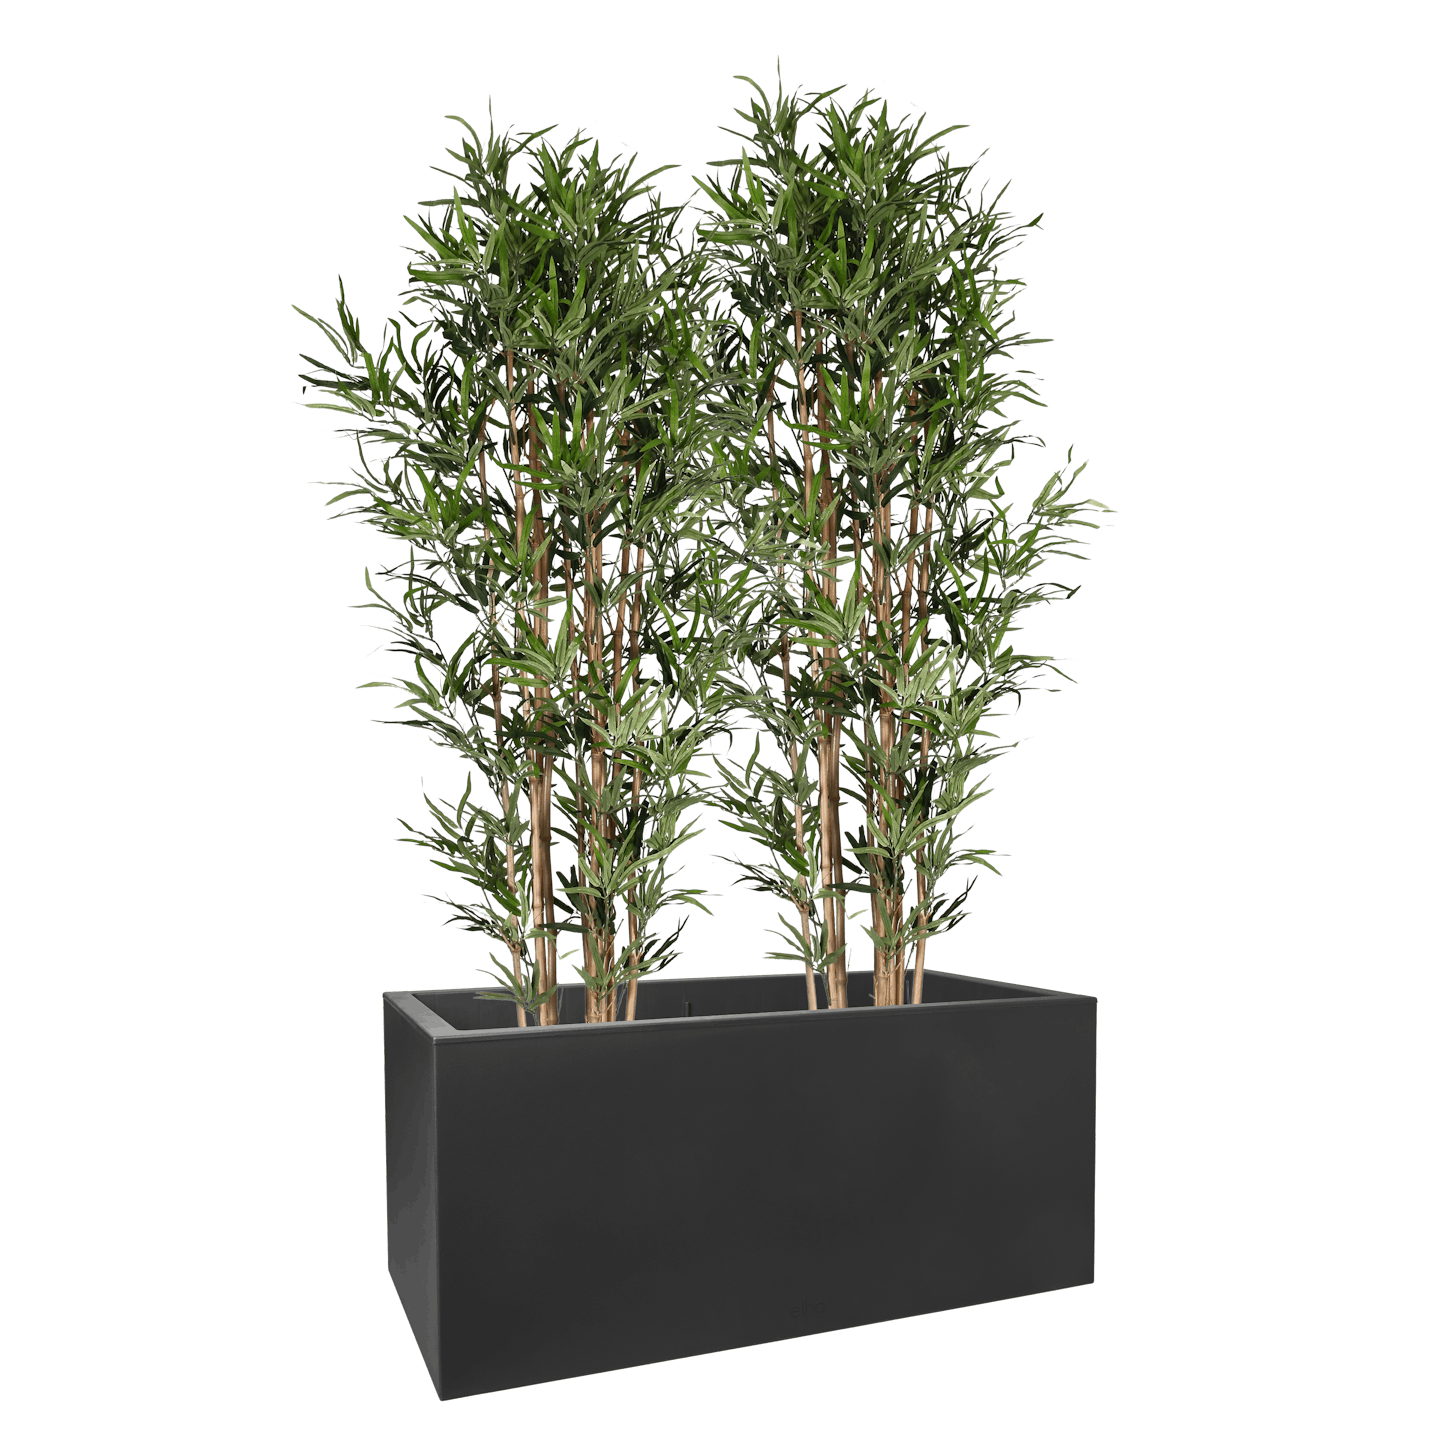 2 tree bamboo screening planter on wheels. Outdoor artificial bamboo in black mobile planter.